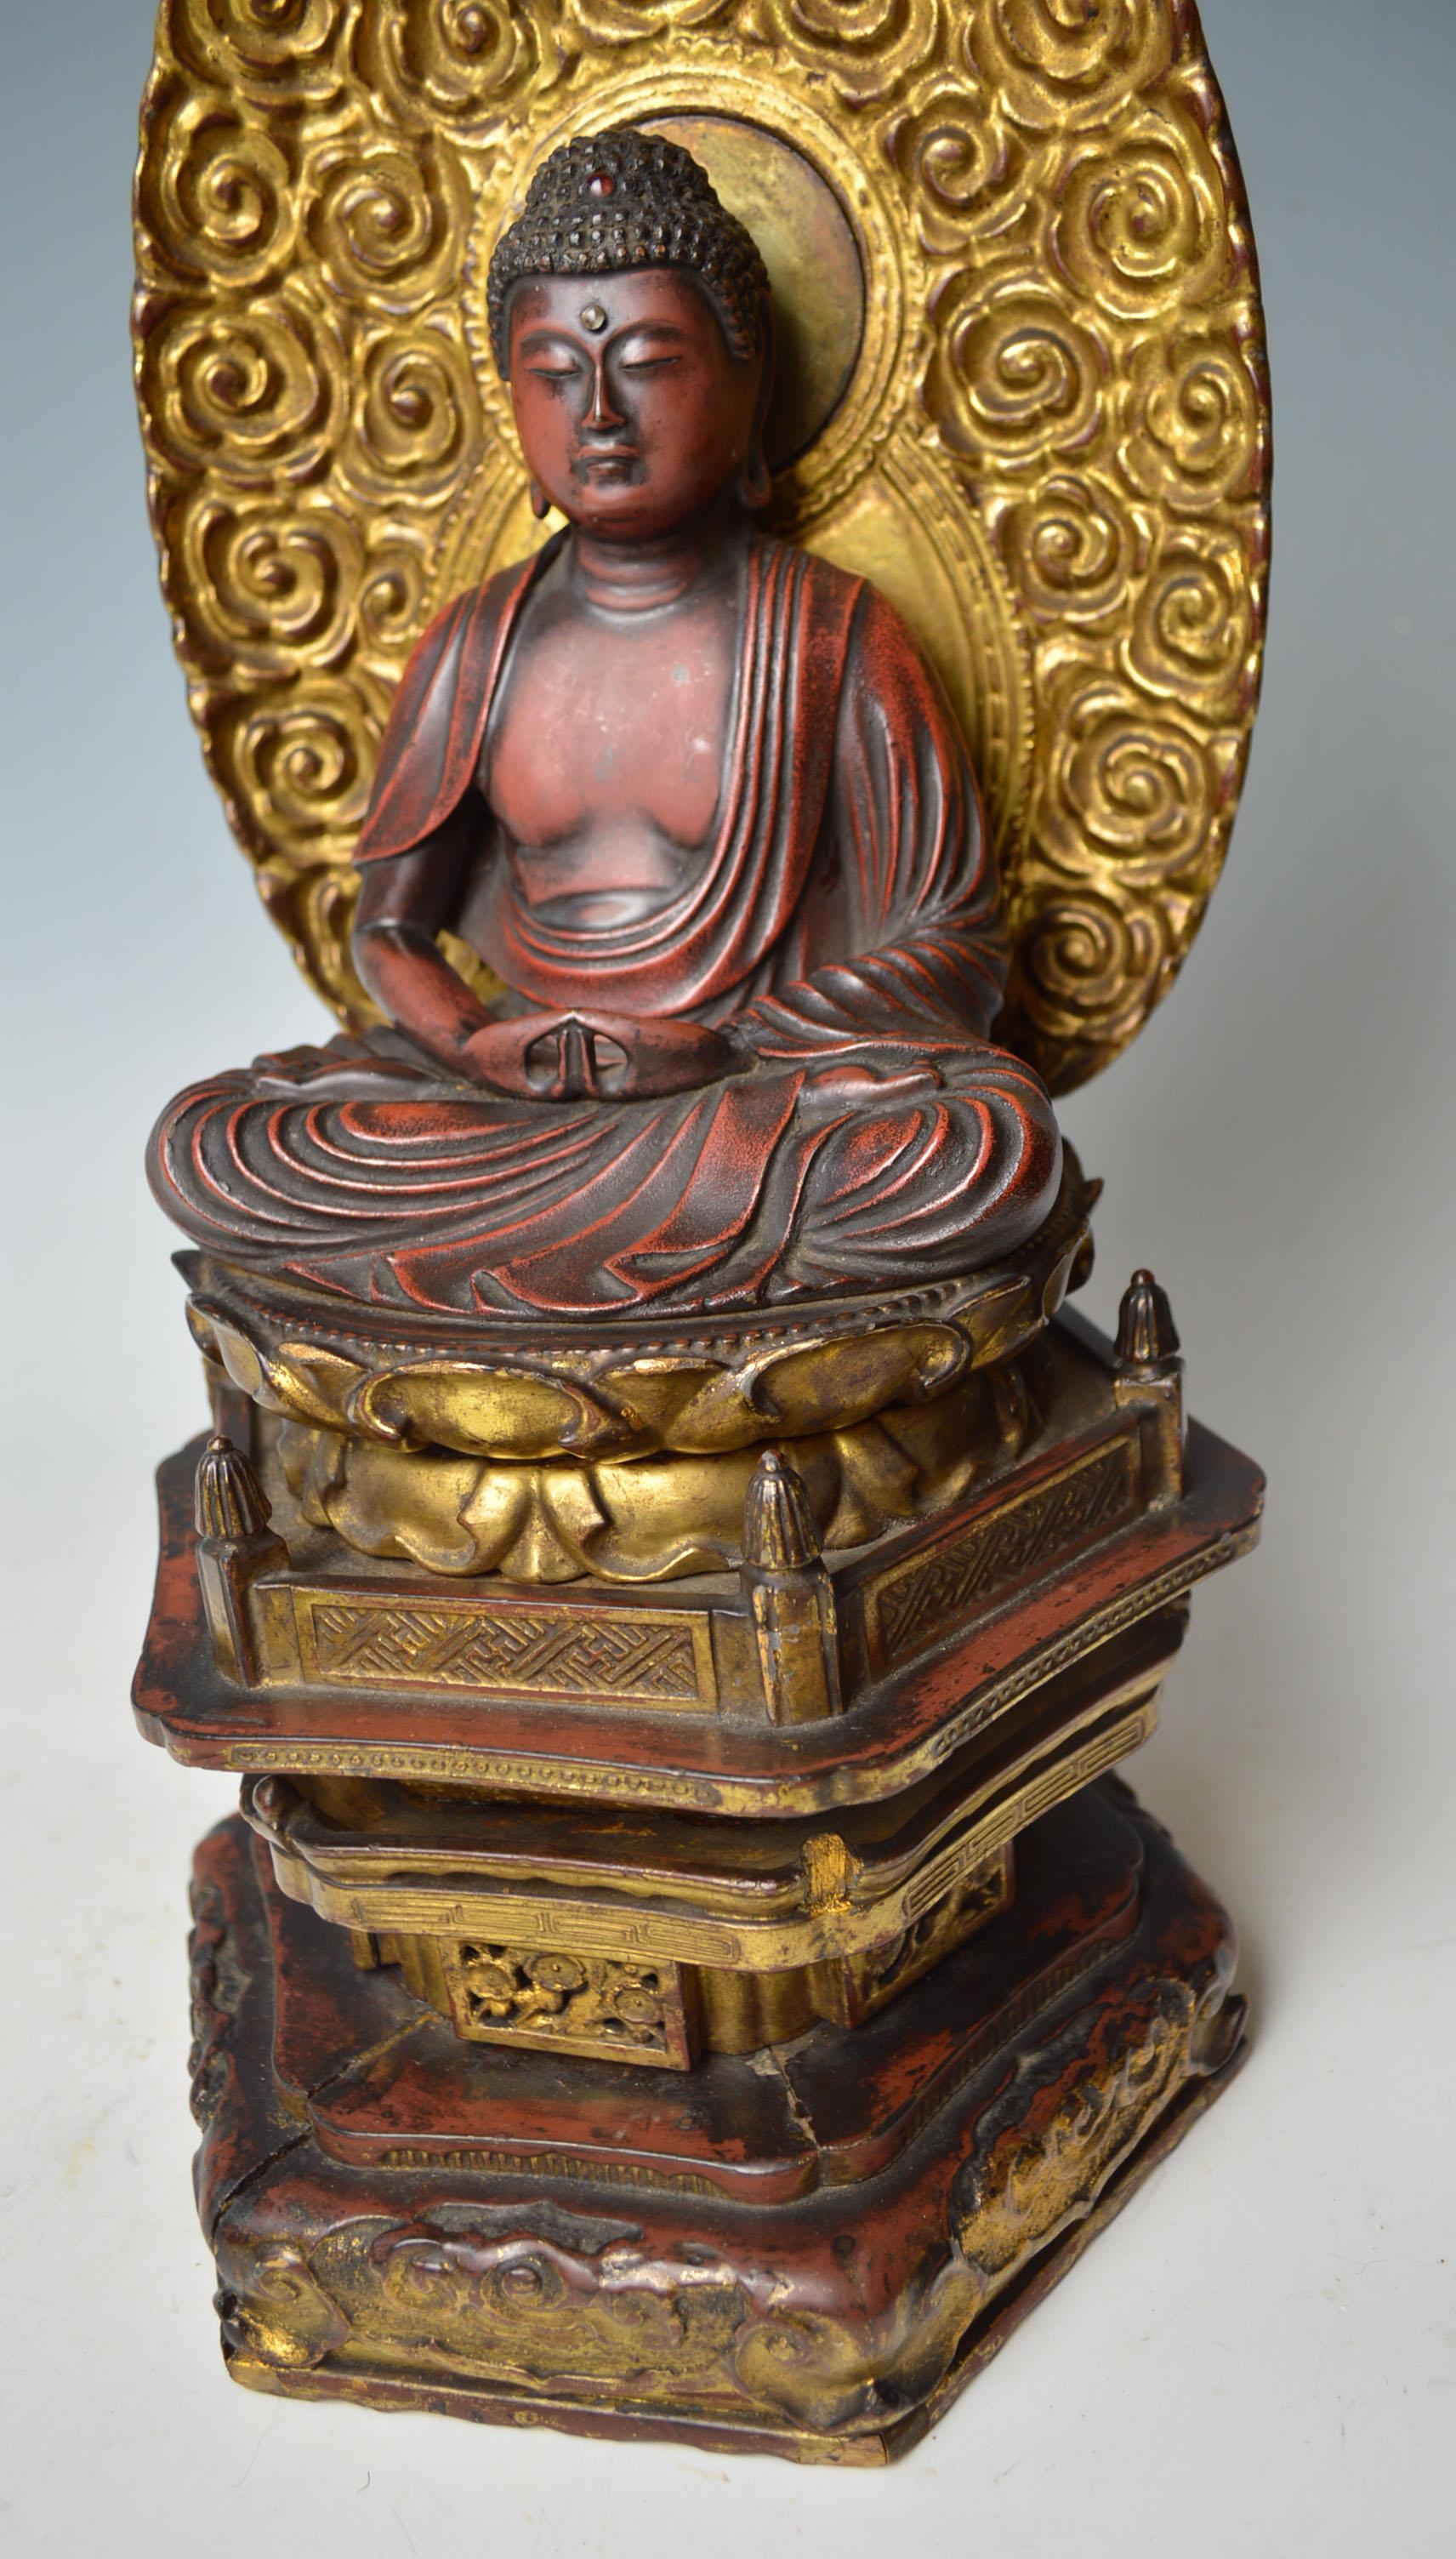 Carved Japanese Lacquered Wood Buddha, Circa 18th / 19th Century Asian Antiques 中国古董